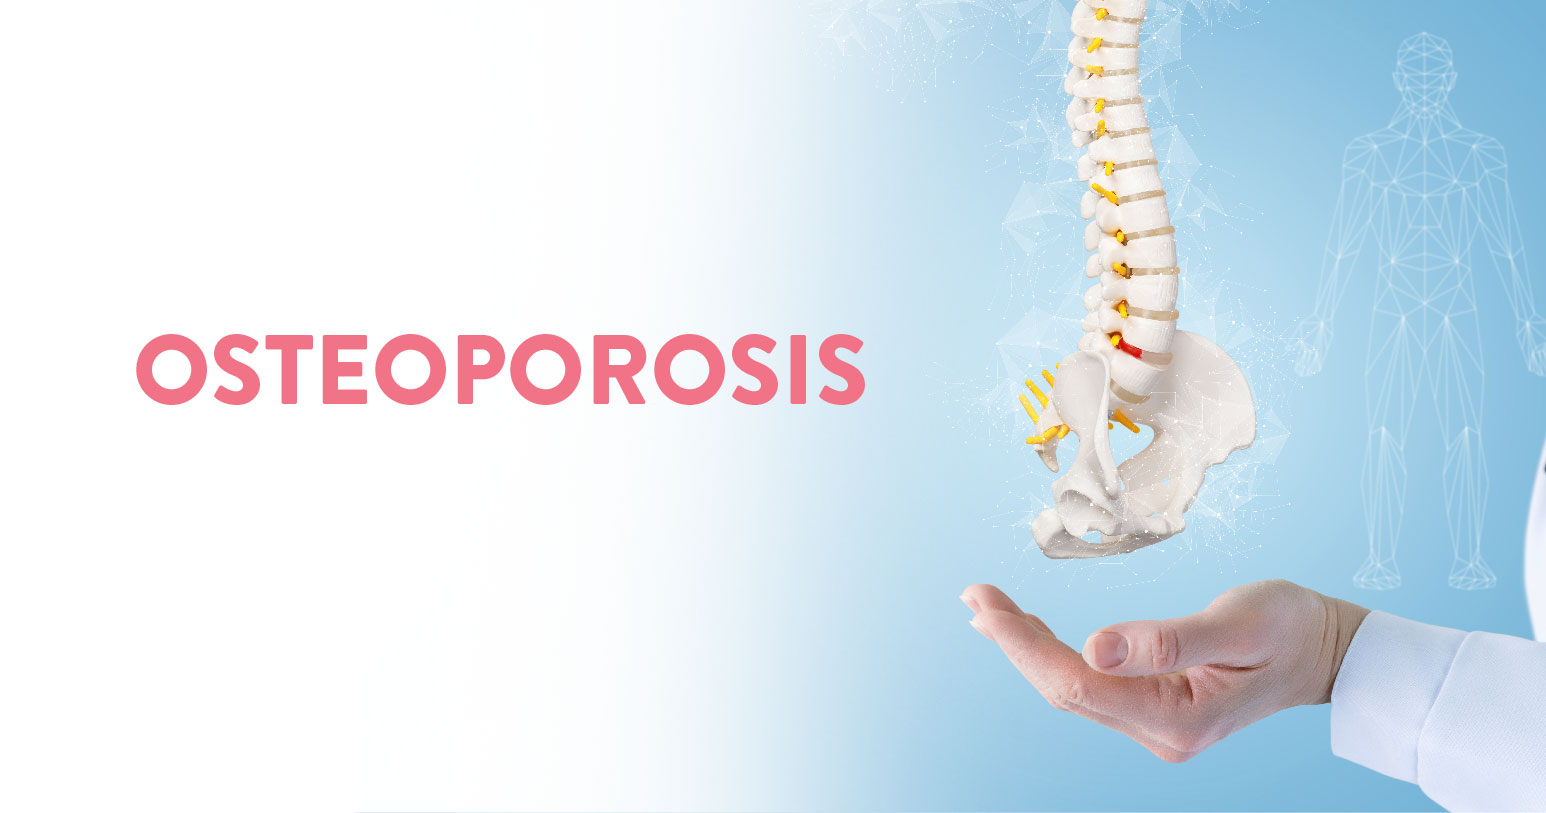 Osteoporosis - Causes, Symptoms and Treatment